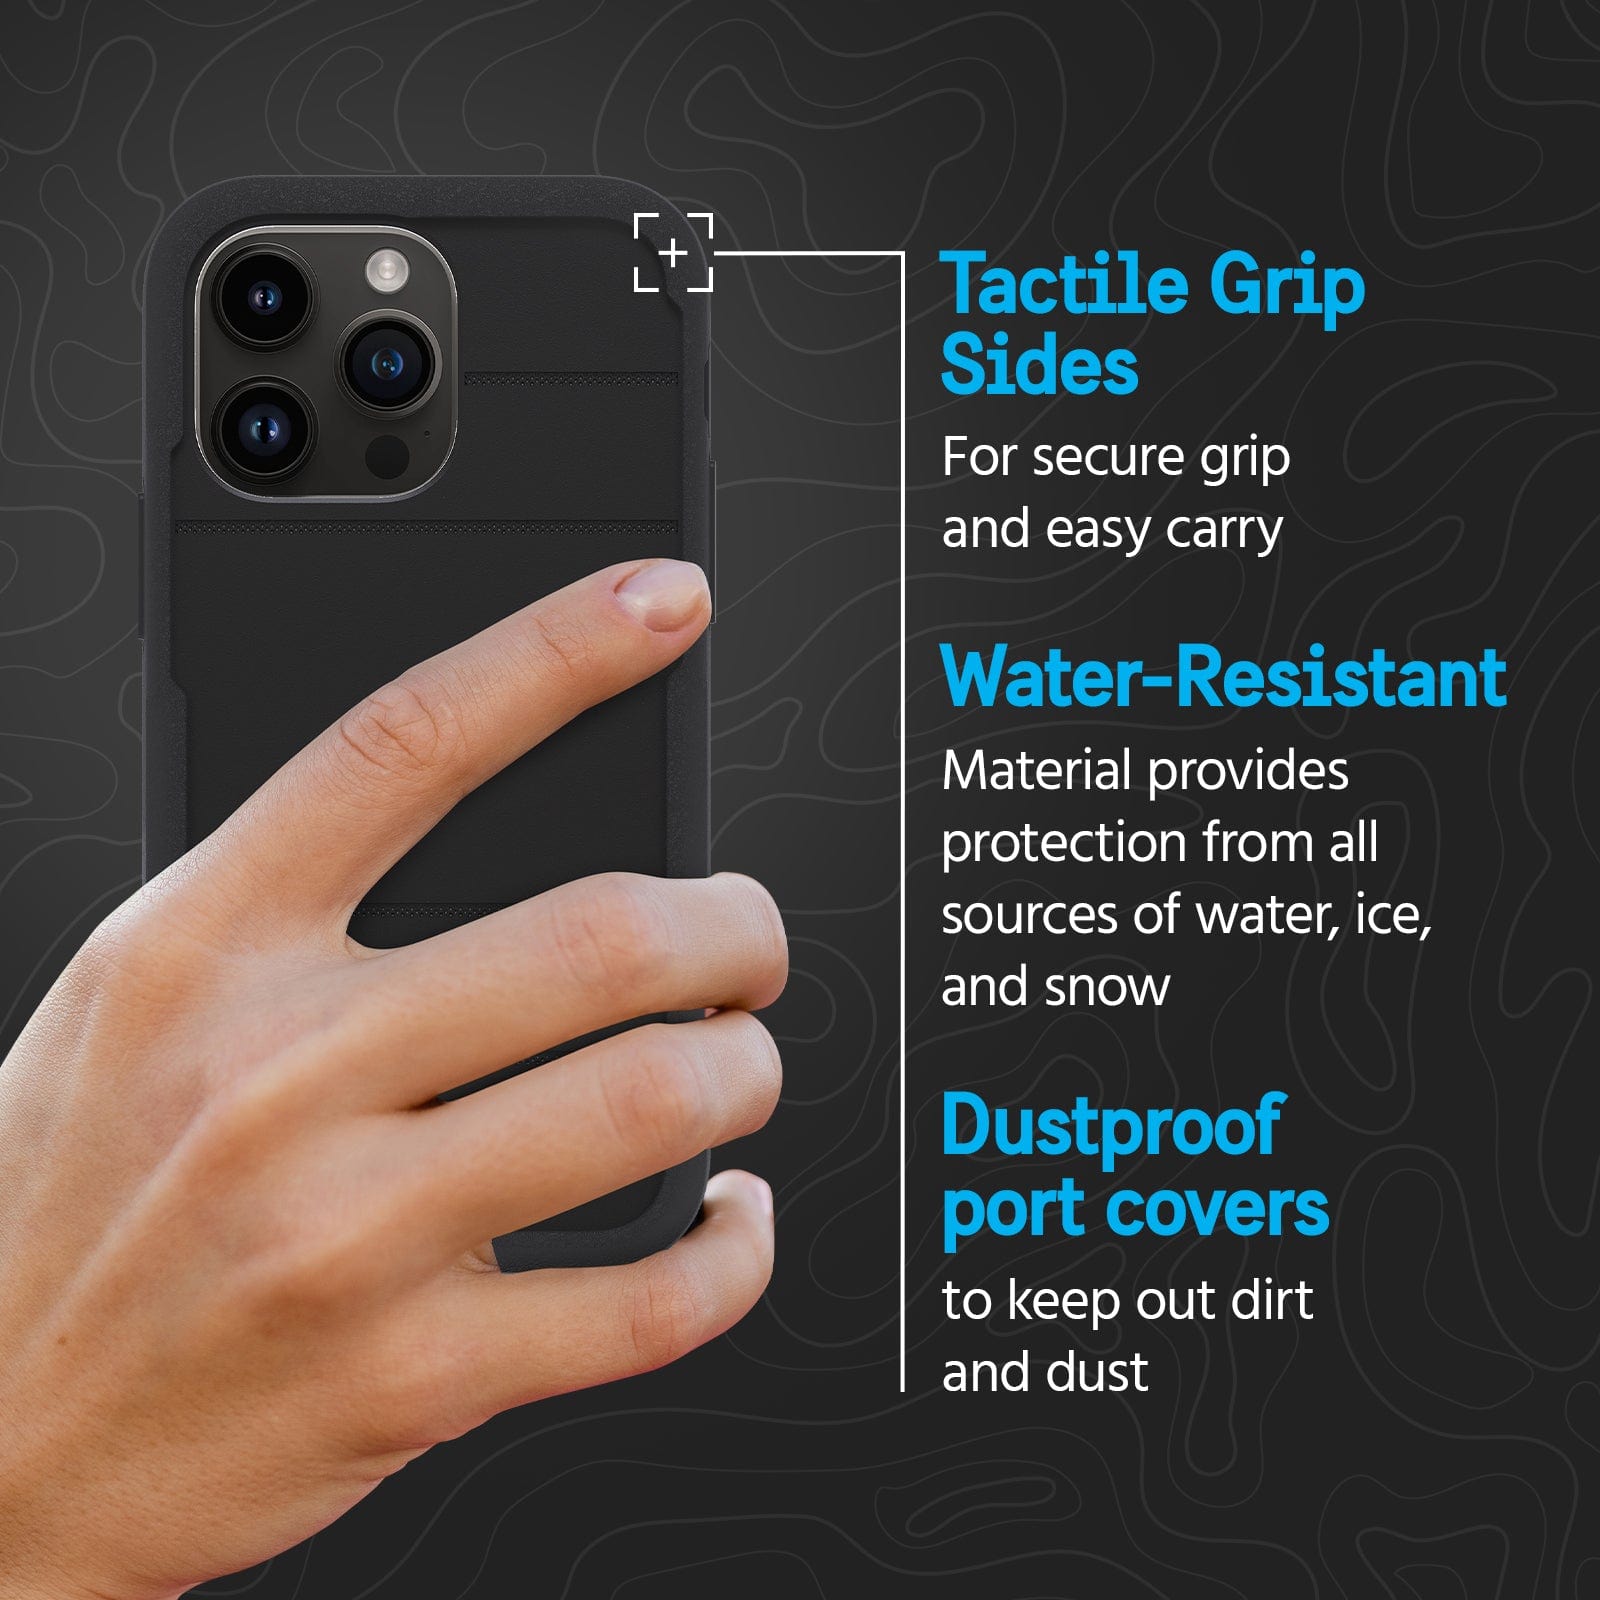 TACTILE GRIP SIDES FOR SECURE AND EASY CARRY. WATER RESISTANT MATERIAL PROVIDES PROTECTION FROM ALL SOURCES OF WATER ICE AND SNOW. DUSTPROOF PORT COVERS TO KEEP OUT DIRT AND DUST.